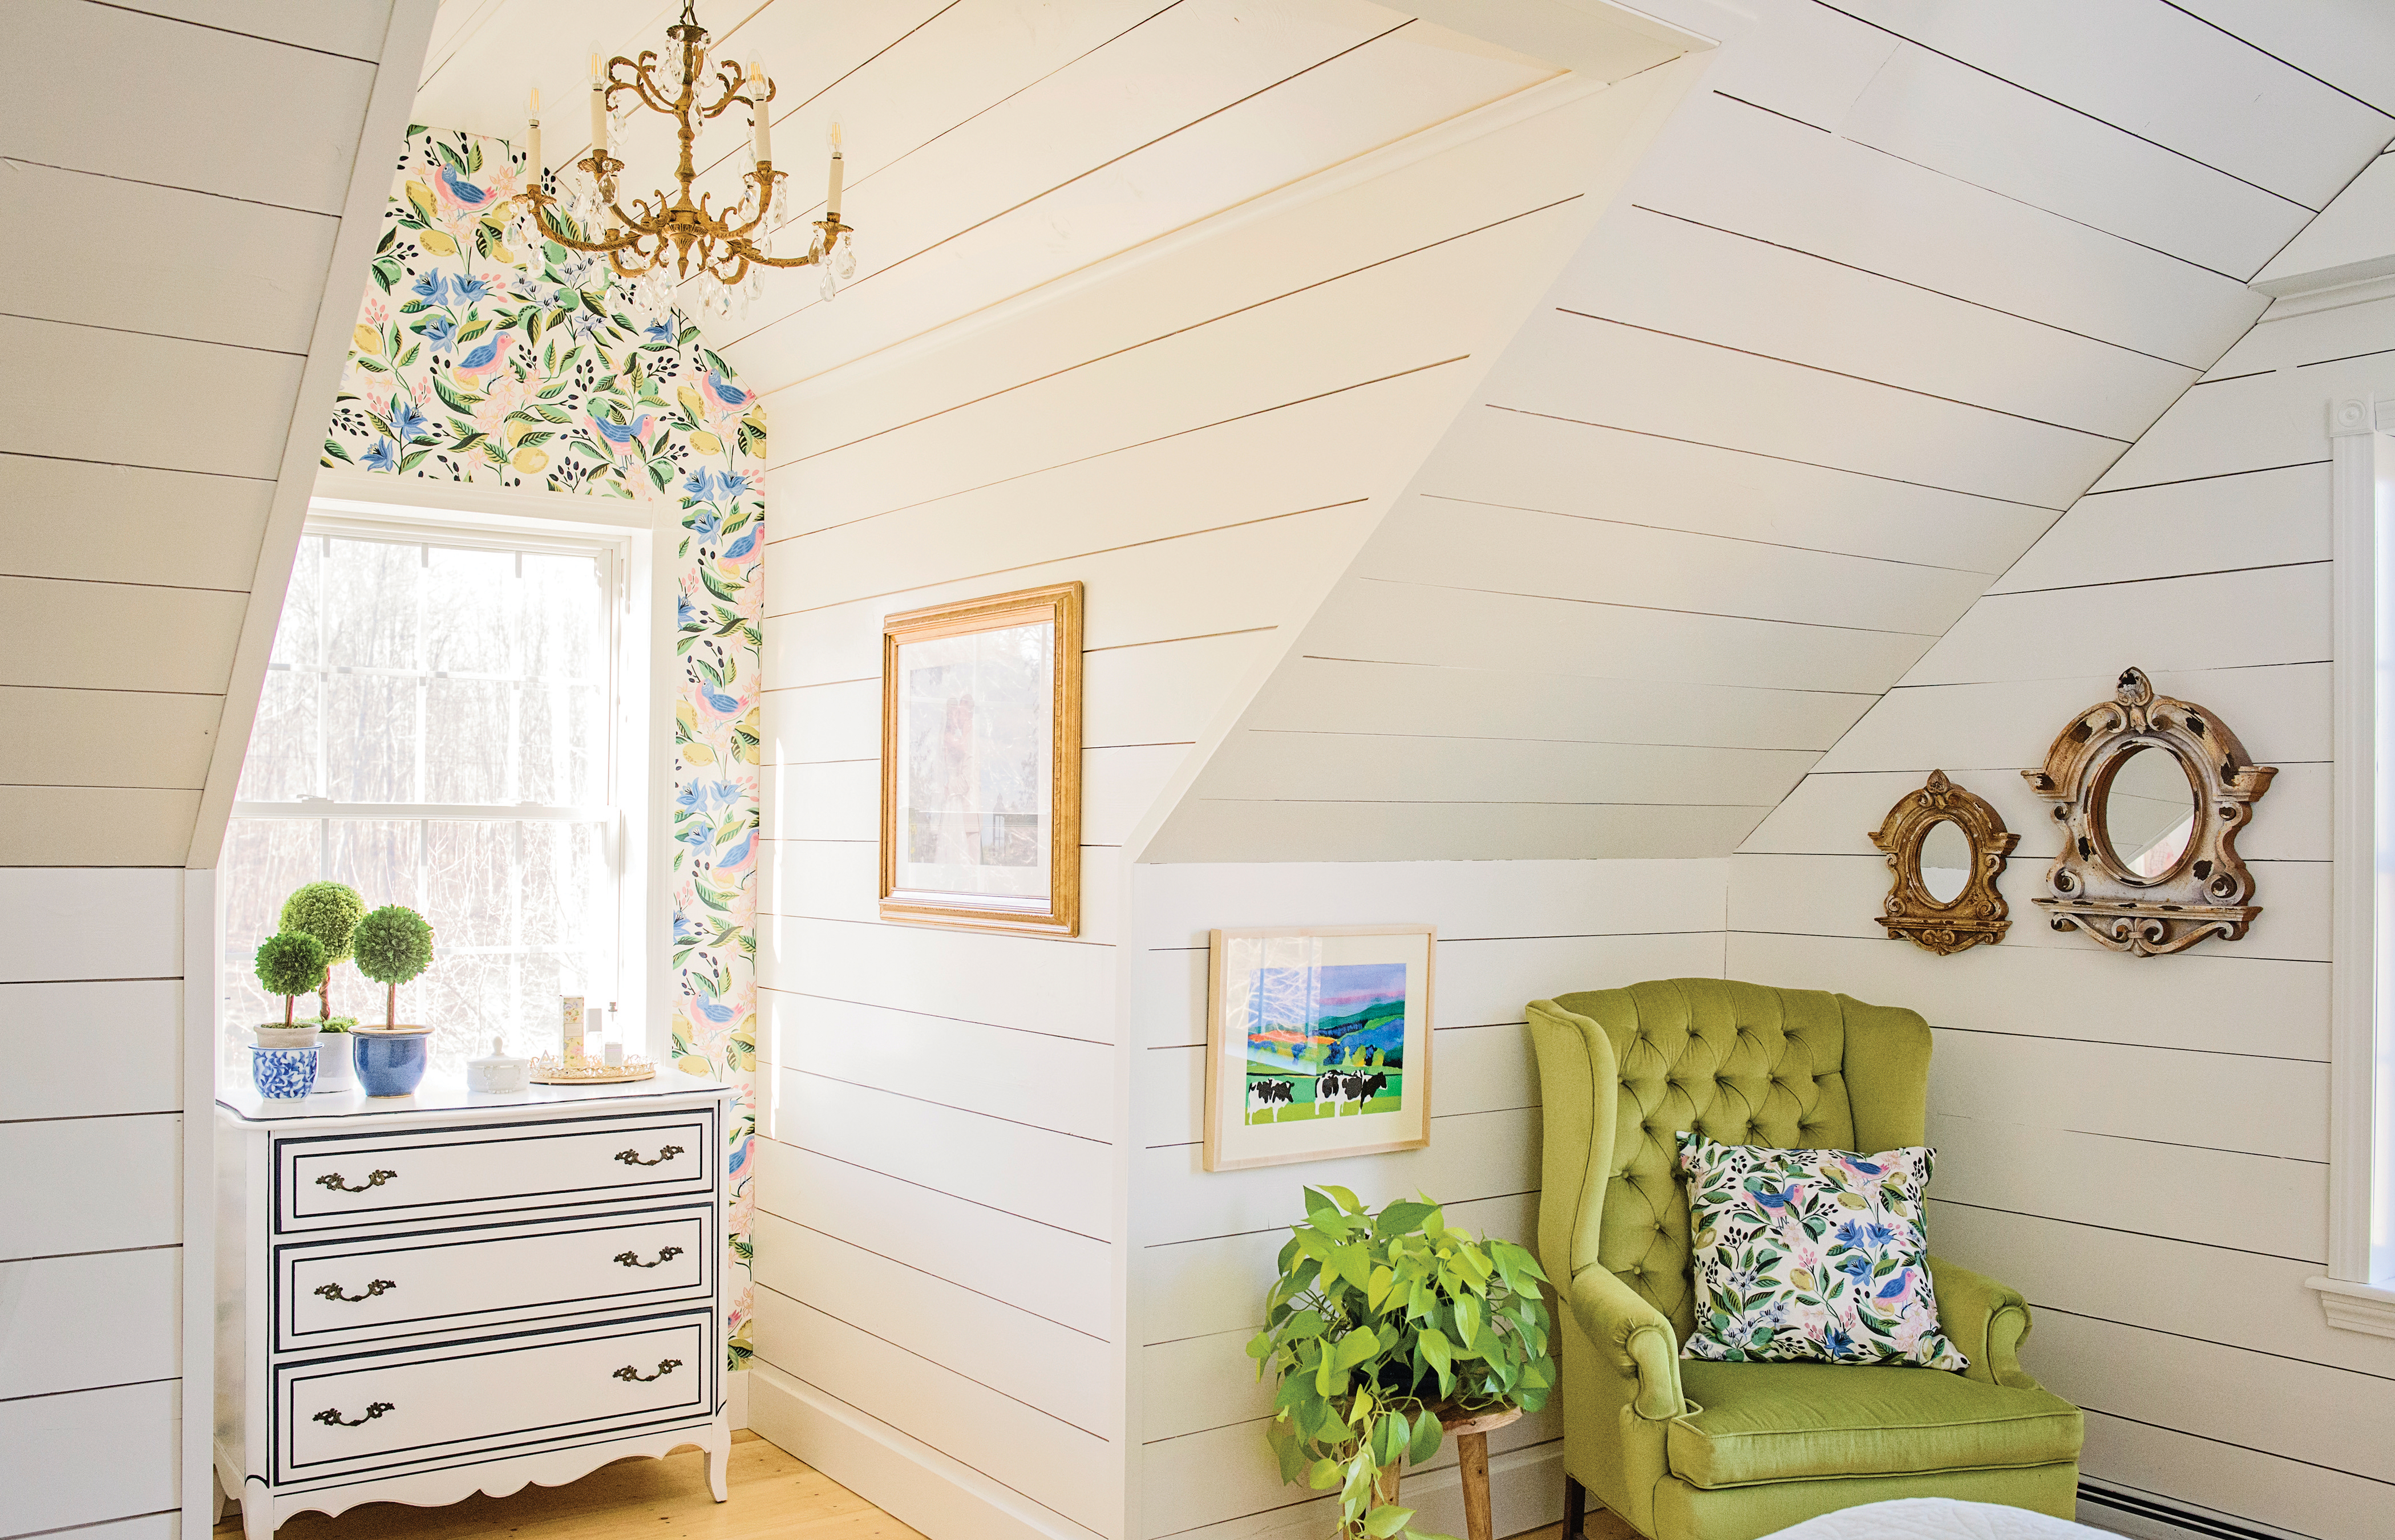 The dormer of the primary bedroom has Caitlin Wilson wallpaper, a gilded chandelier from The Collector’s Eye in Stratham, New Hampshire, and a dresser that homeowner Amber Roy refurbished. “I take any old furniture offered to me,” she says. The cow painting by Woody Jackson is from Edgewater Gallery in Middlebury, Vermont.